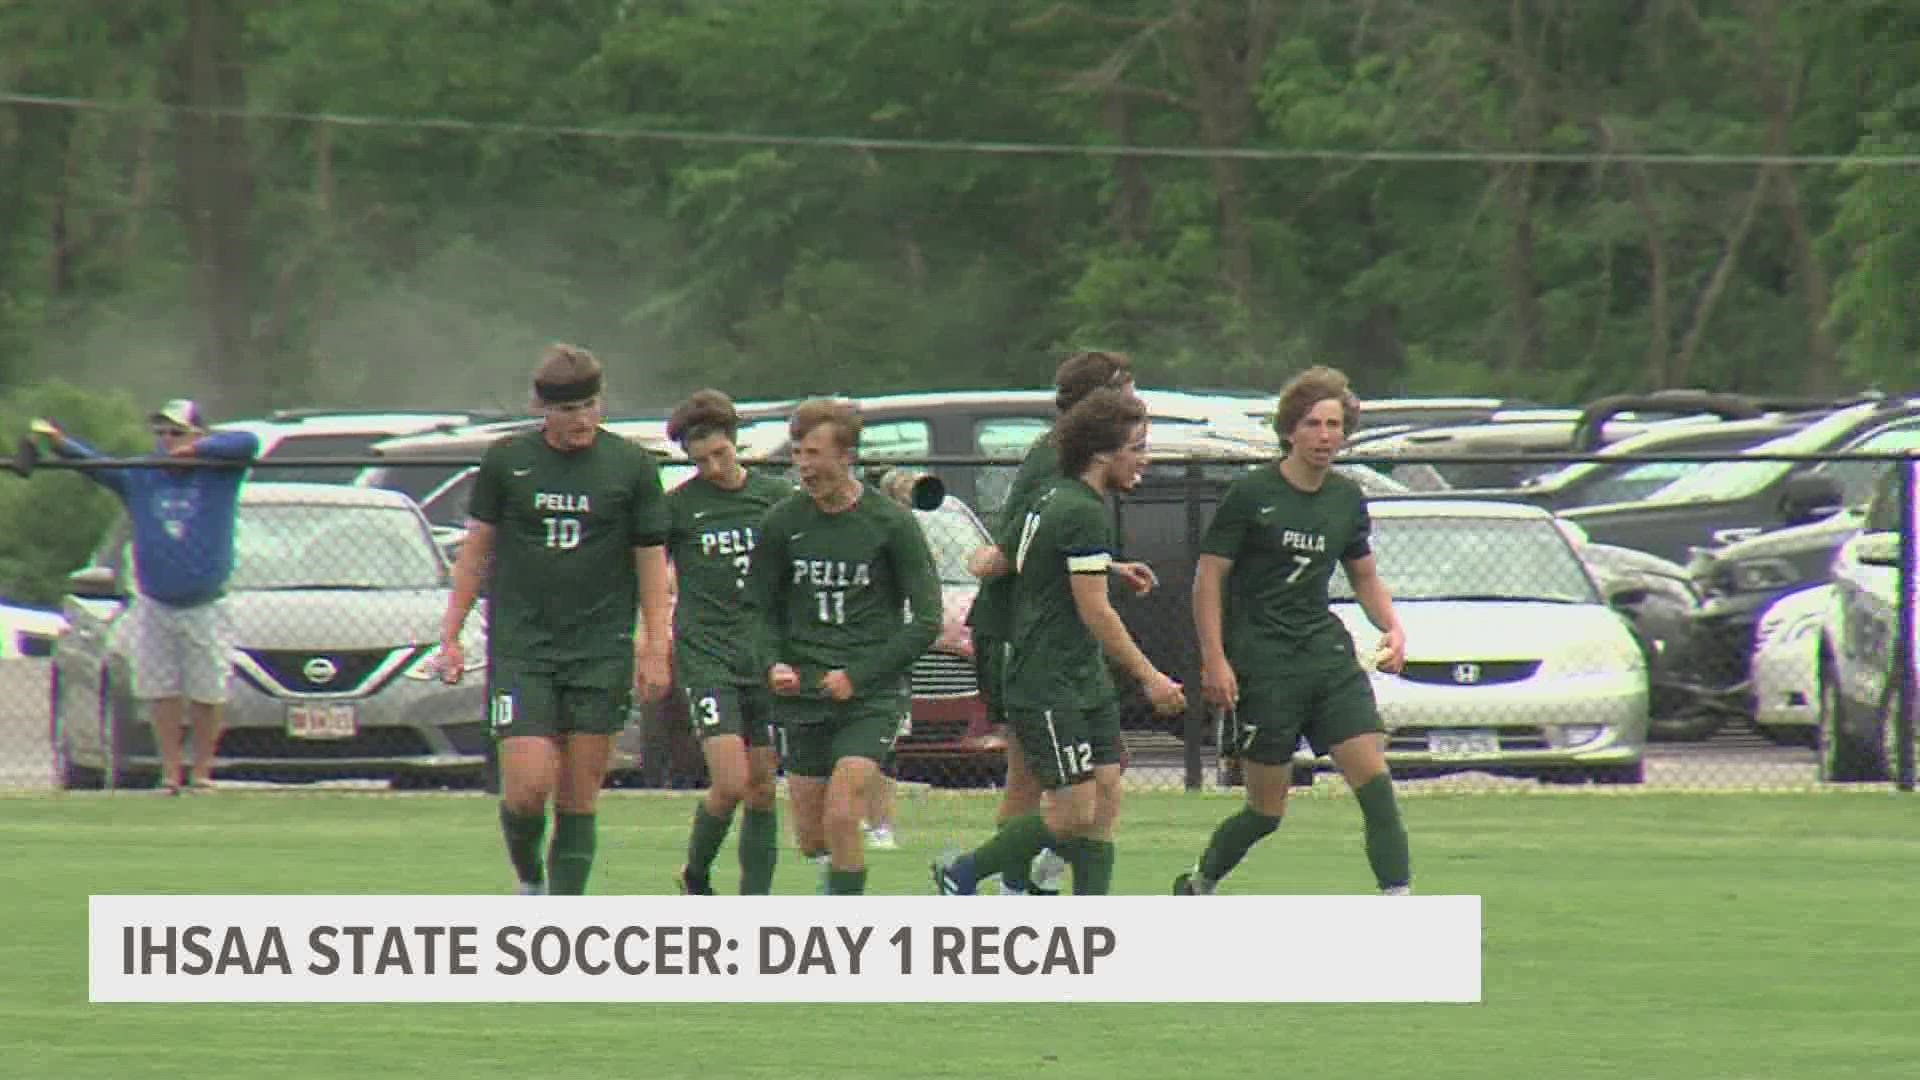 The IHSAA boys state soccer tournament kicked off Wednesday with some close matches and even some upsets.